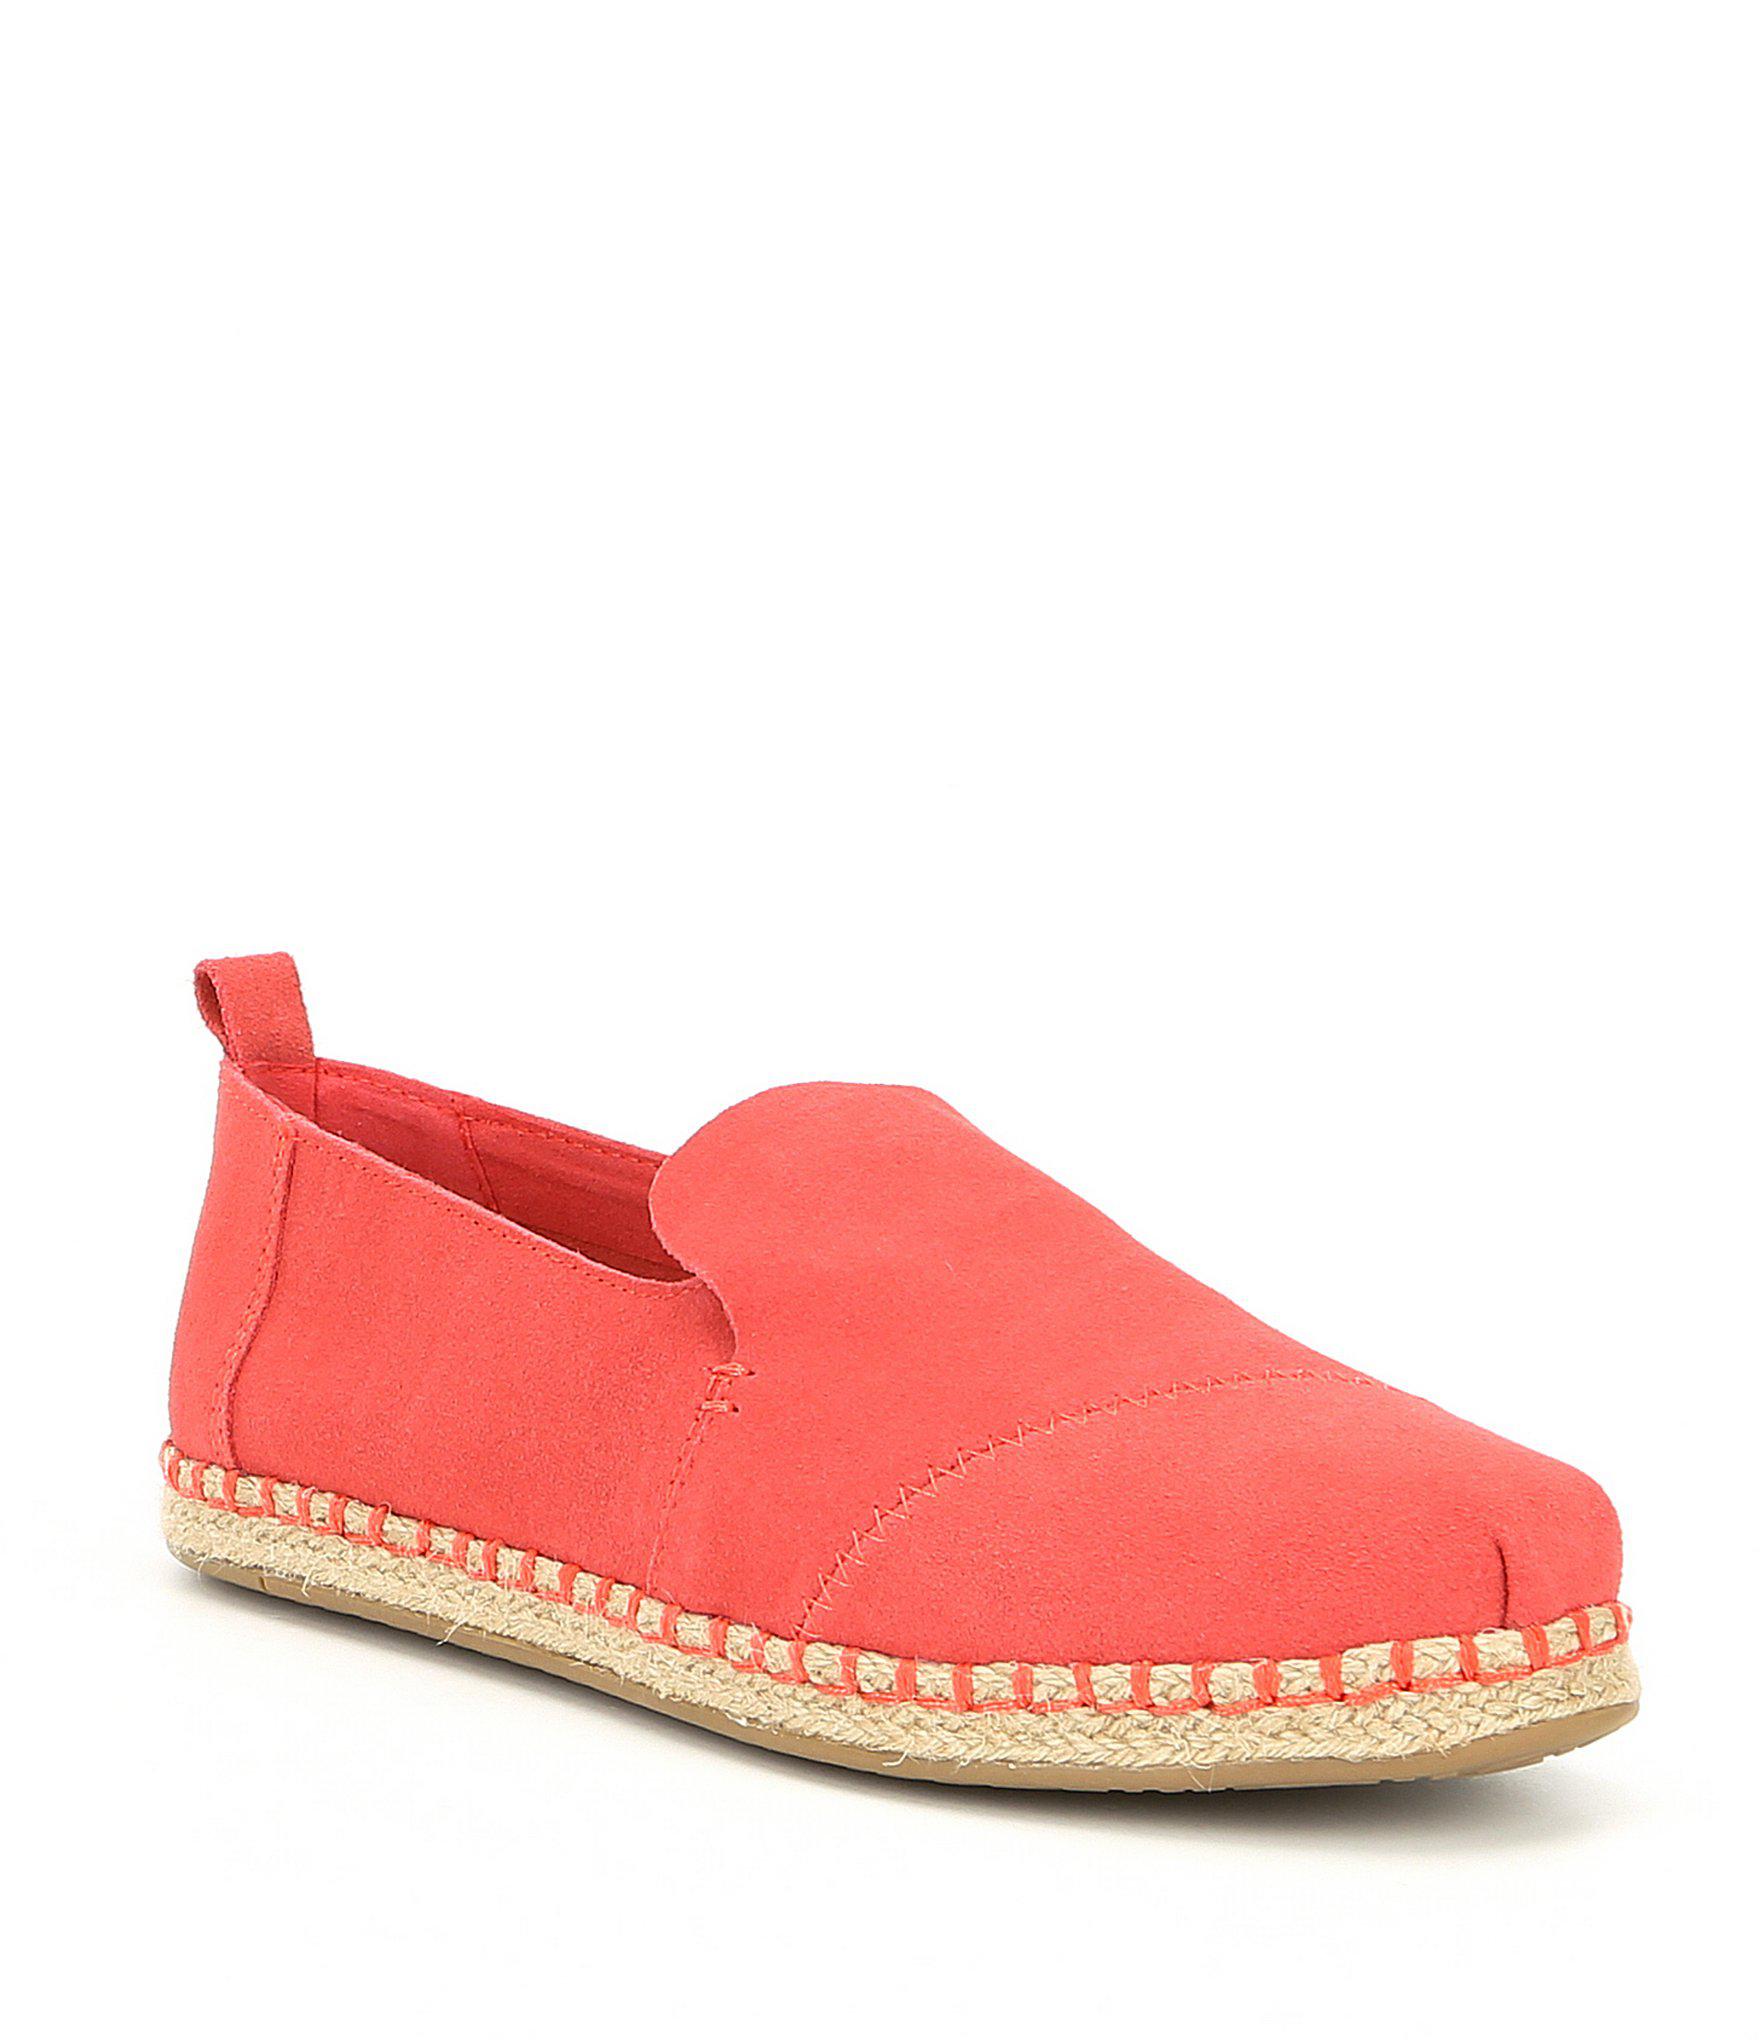 Lyst - Toms Women's Deconstructed Suede Alpargata Espadrilles in Red